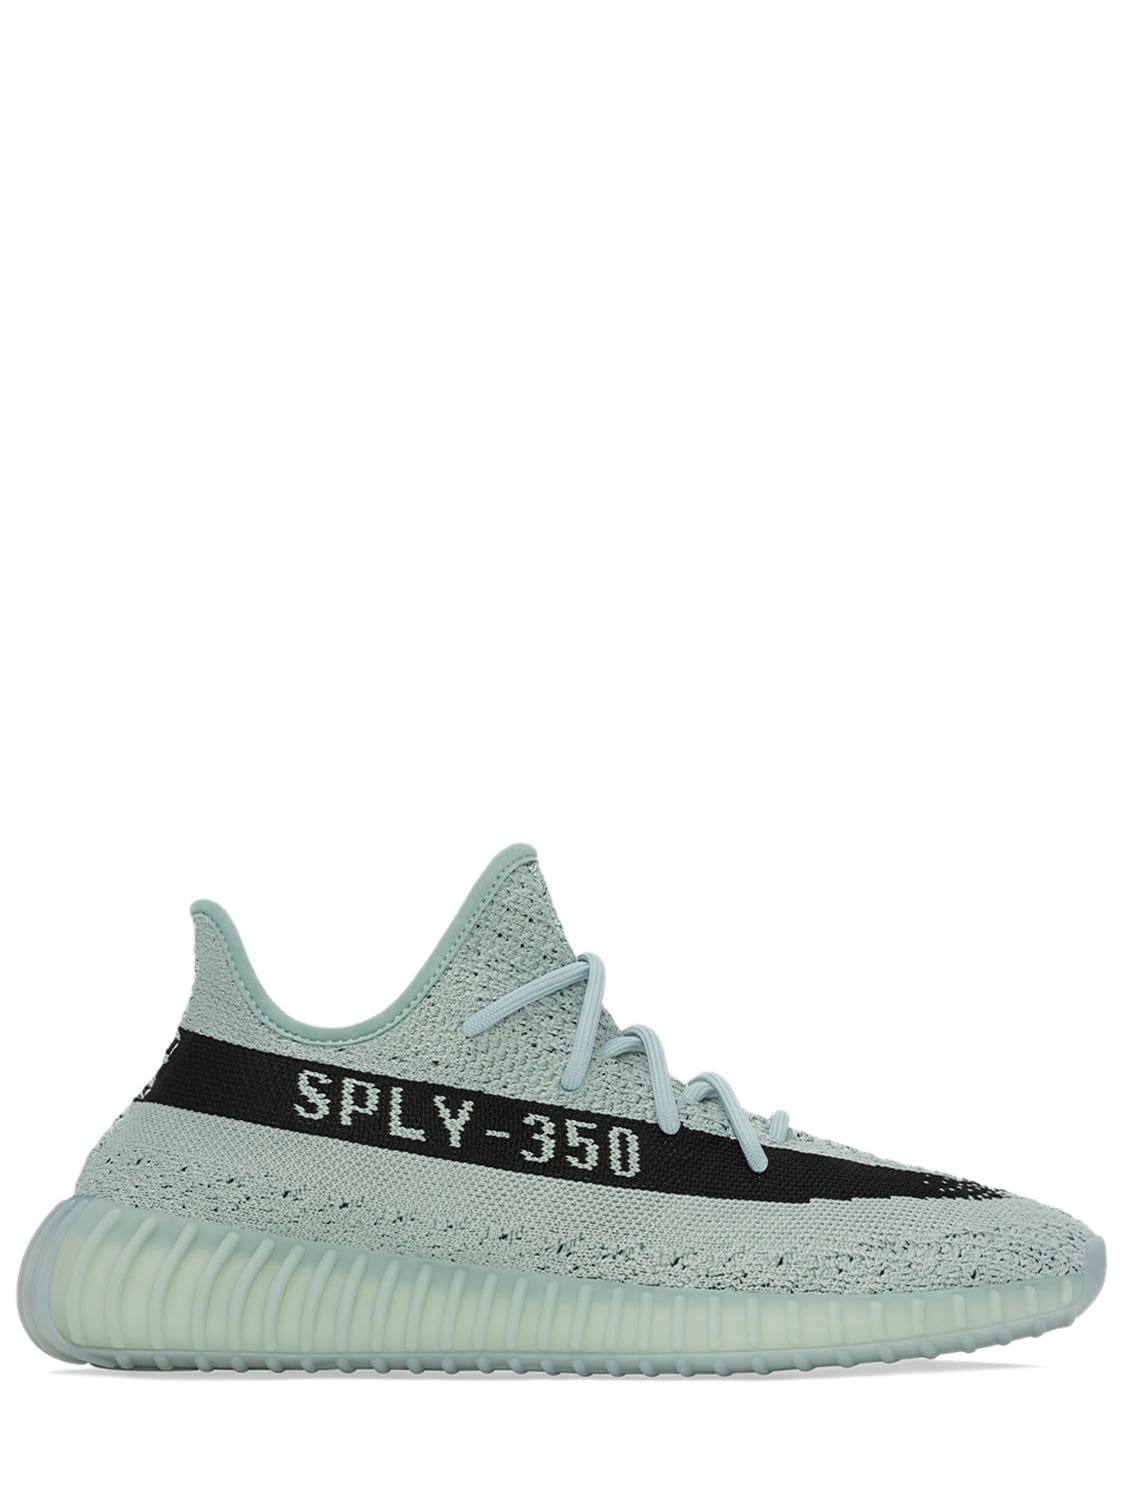 YEEZY BOOST 350 V2 SNEAKERS